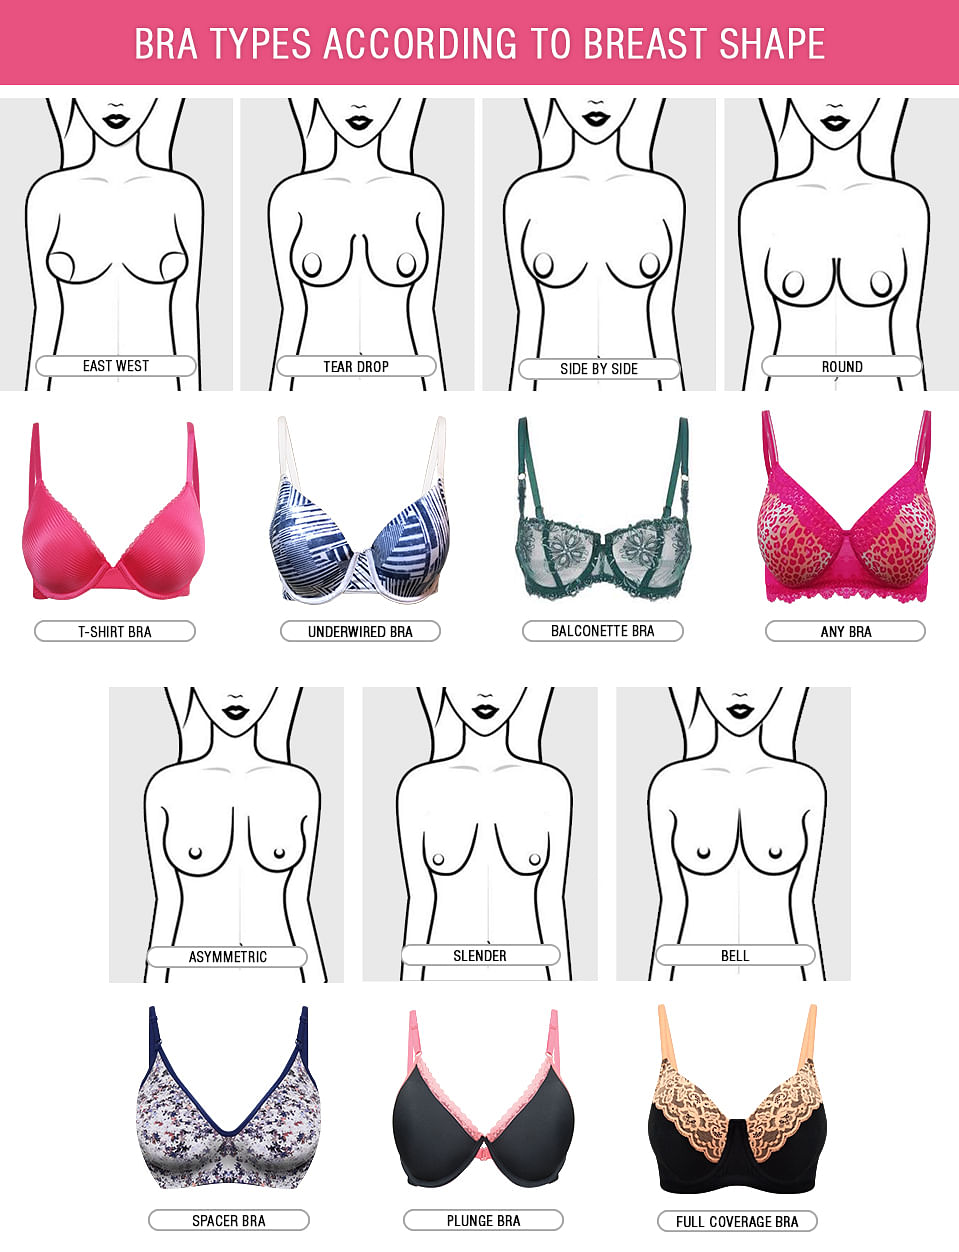 Bra Fitting Guide: Tips for a Perfectly Fitted Bra